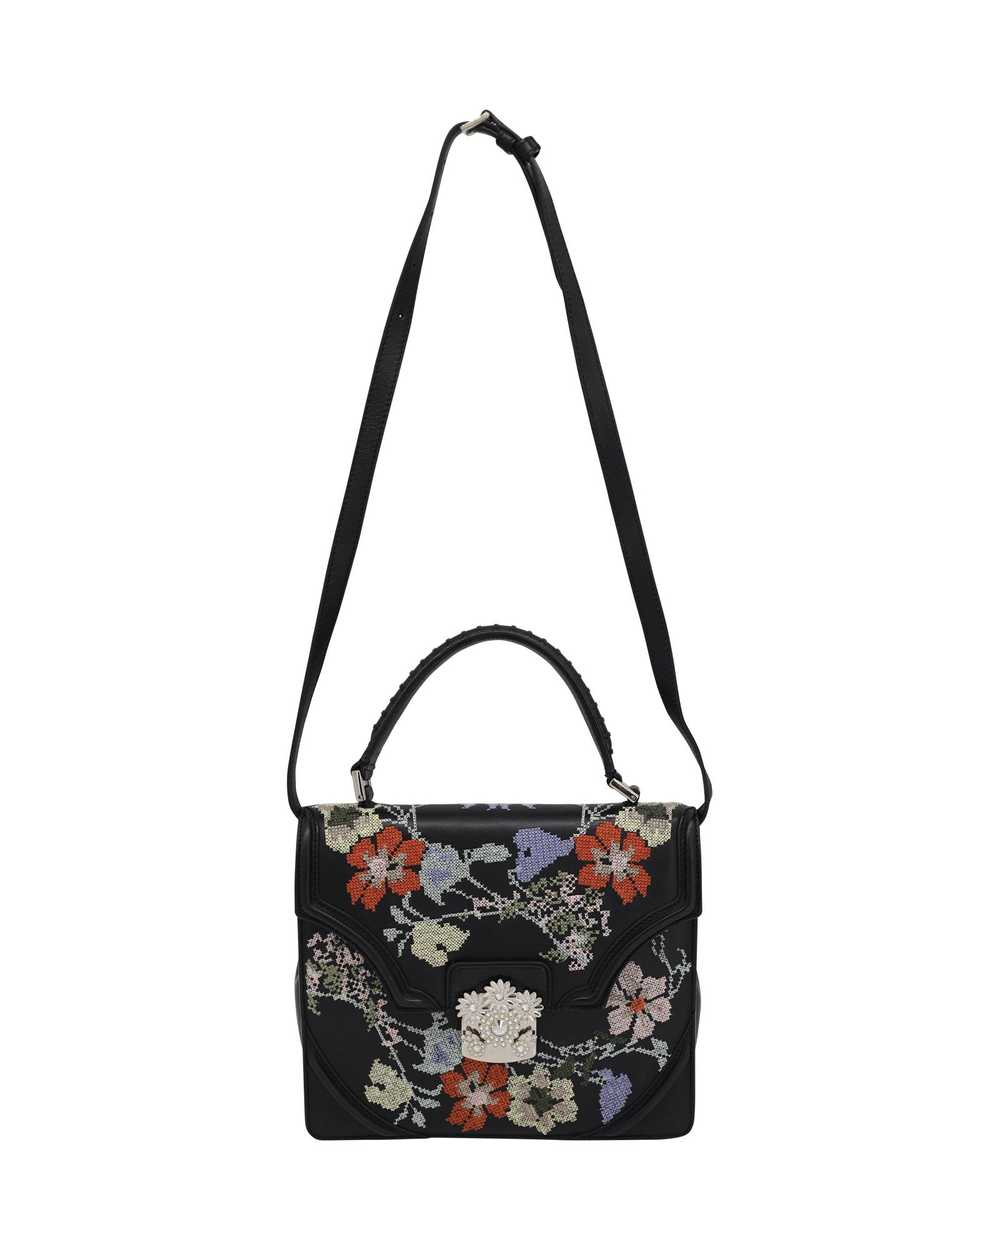 Product Details Floral Embroidered Top Handle Bag - image 2